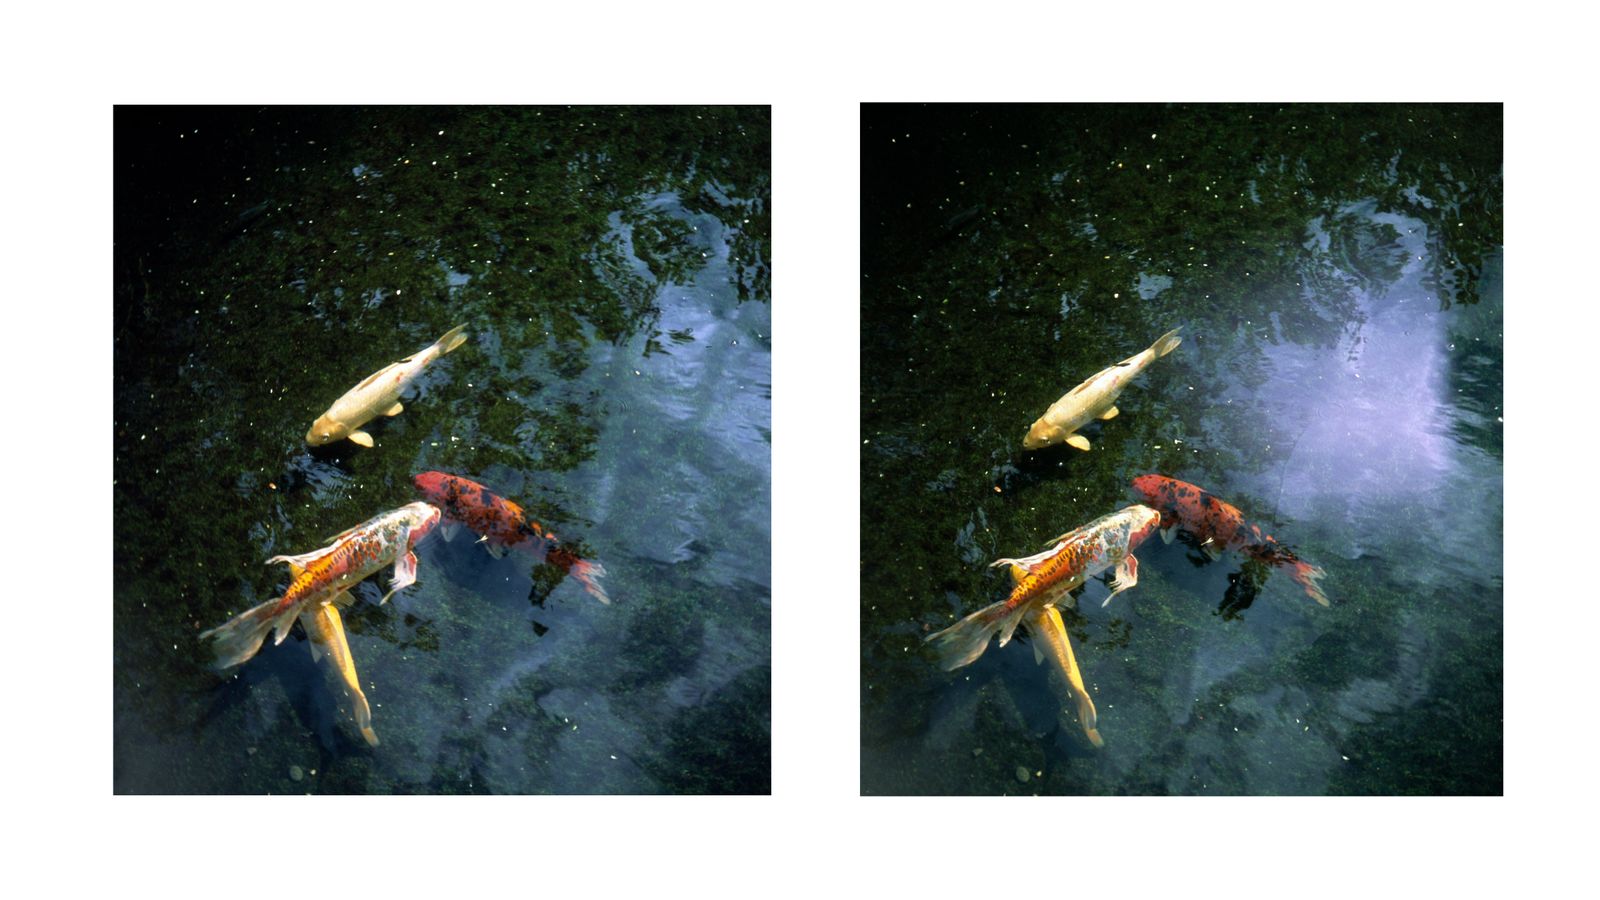 © RACHEL TREIDE - Stereograph by Rachel Treide: "Miami Koi," 2018 (to view this image in 3D, use the stereo freeview method)